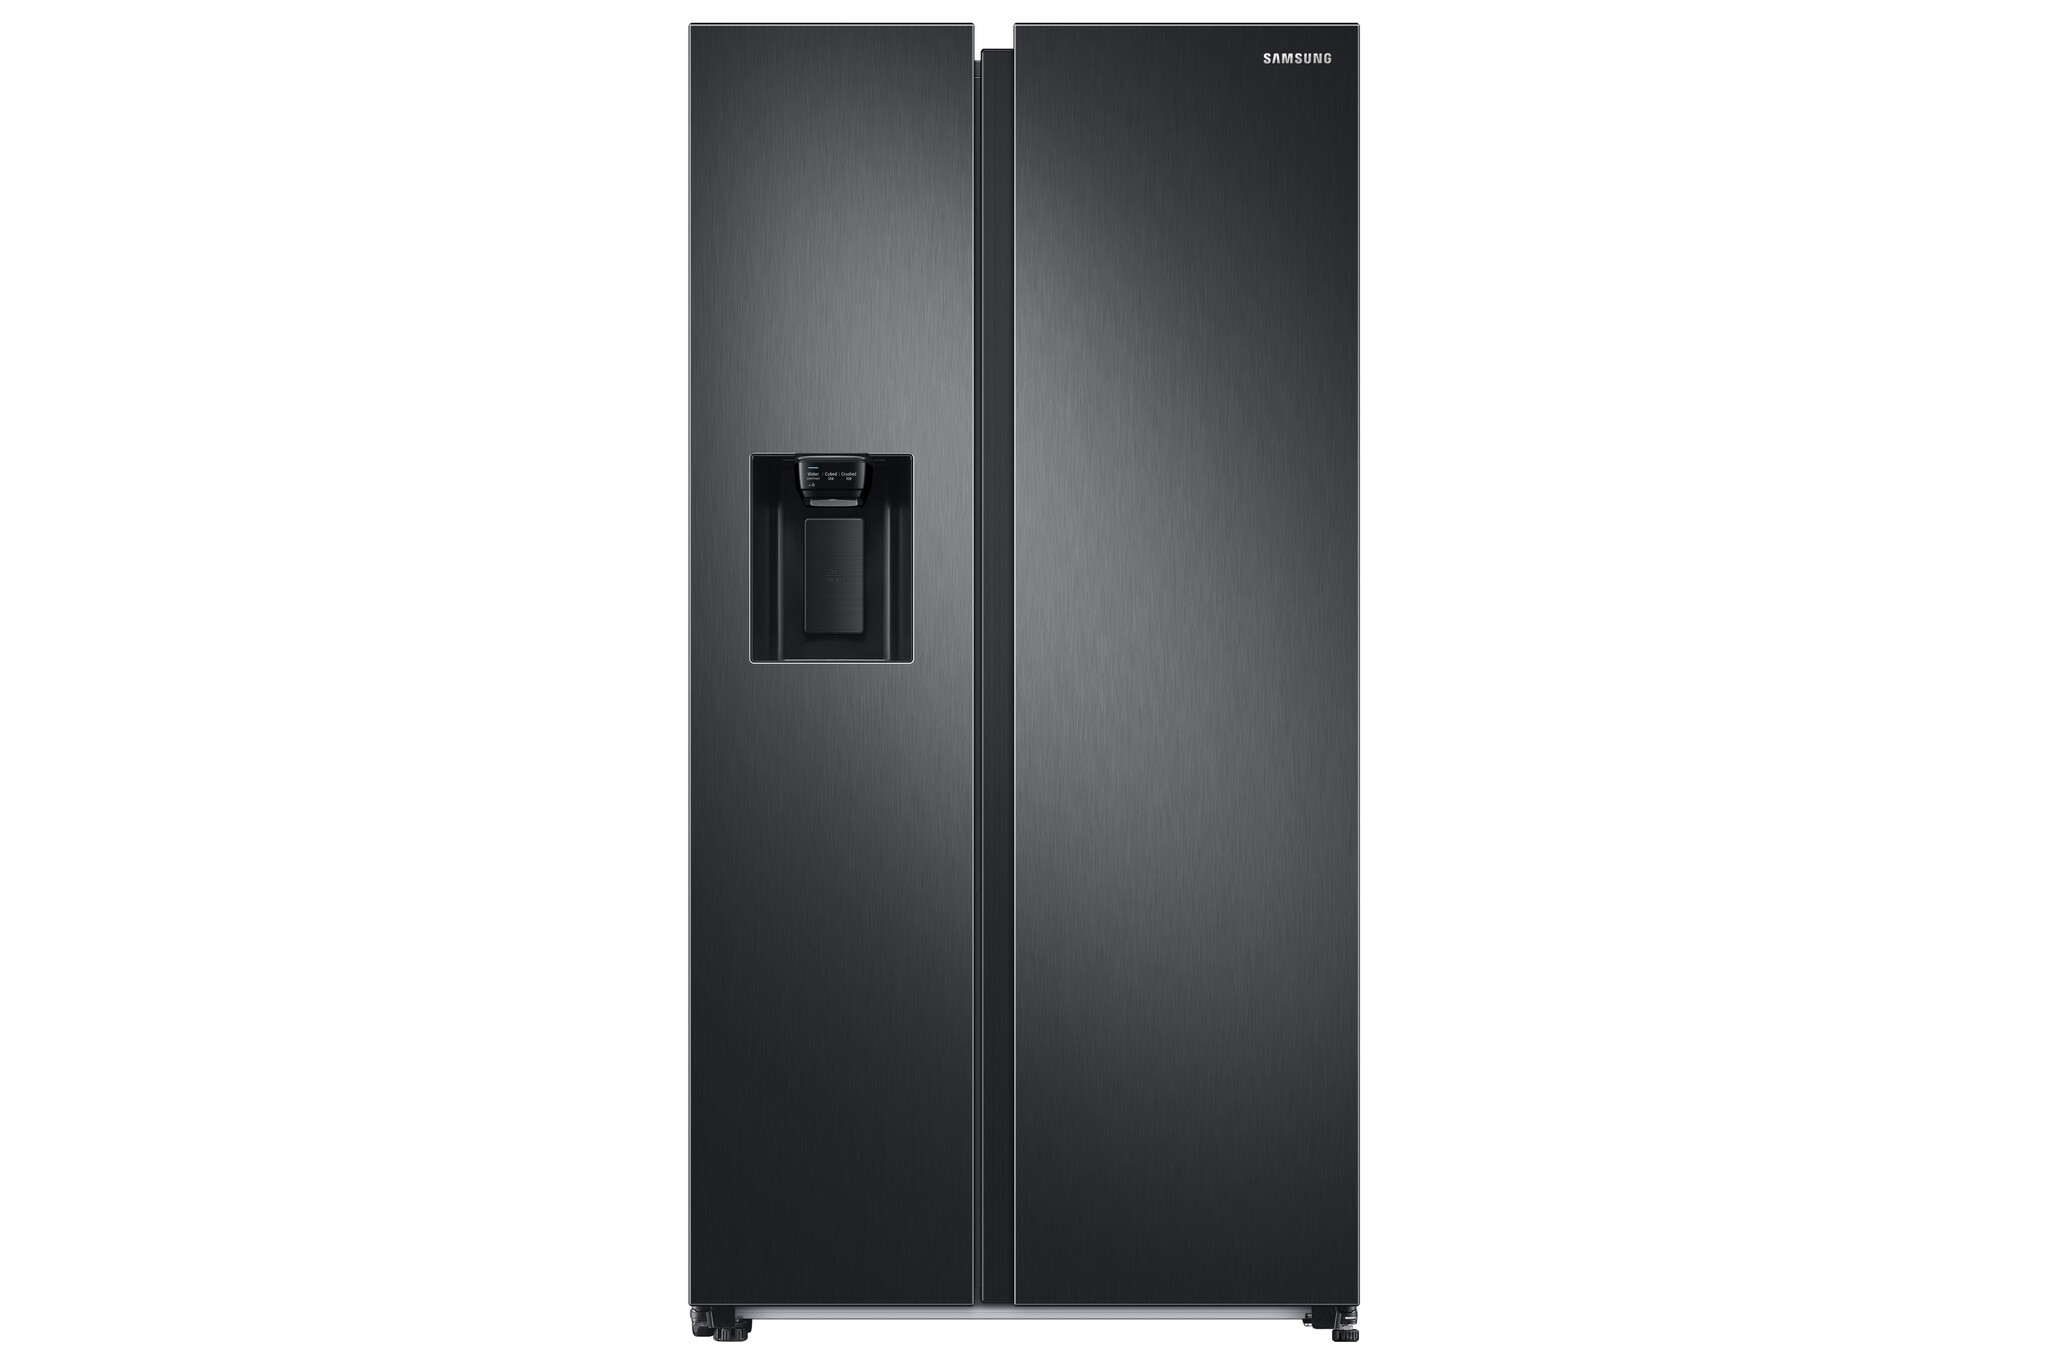 Samsung Series 7 RS68CG883EB1 Total No Frost American Fridge Freezer – Black – E Rated #366728